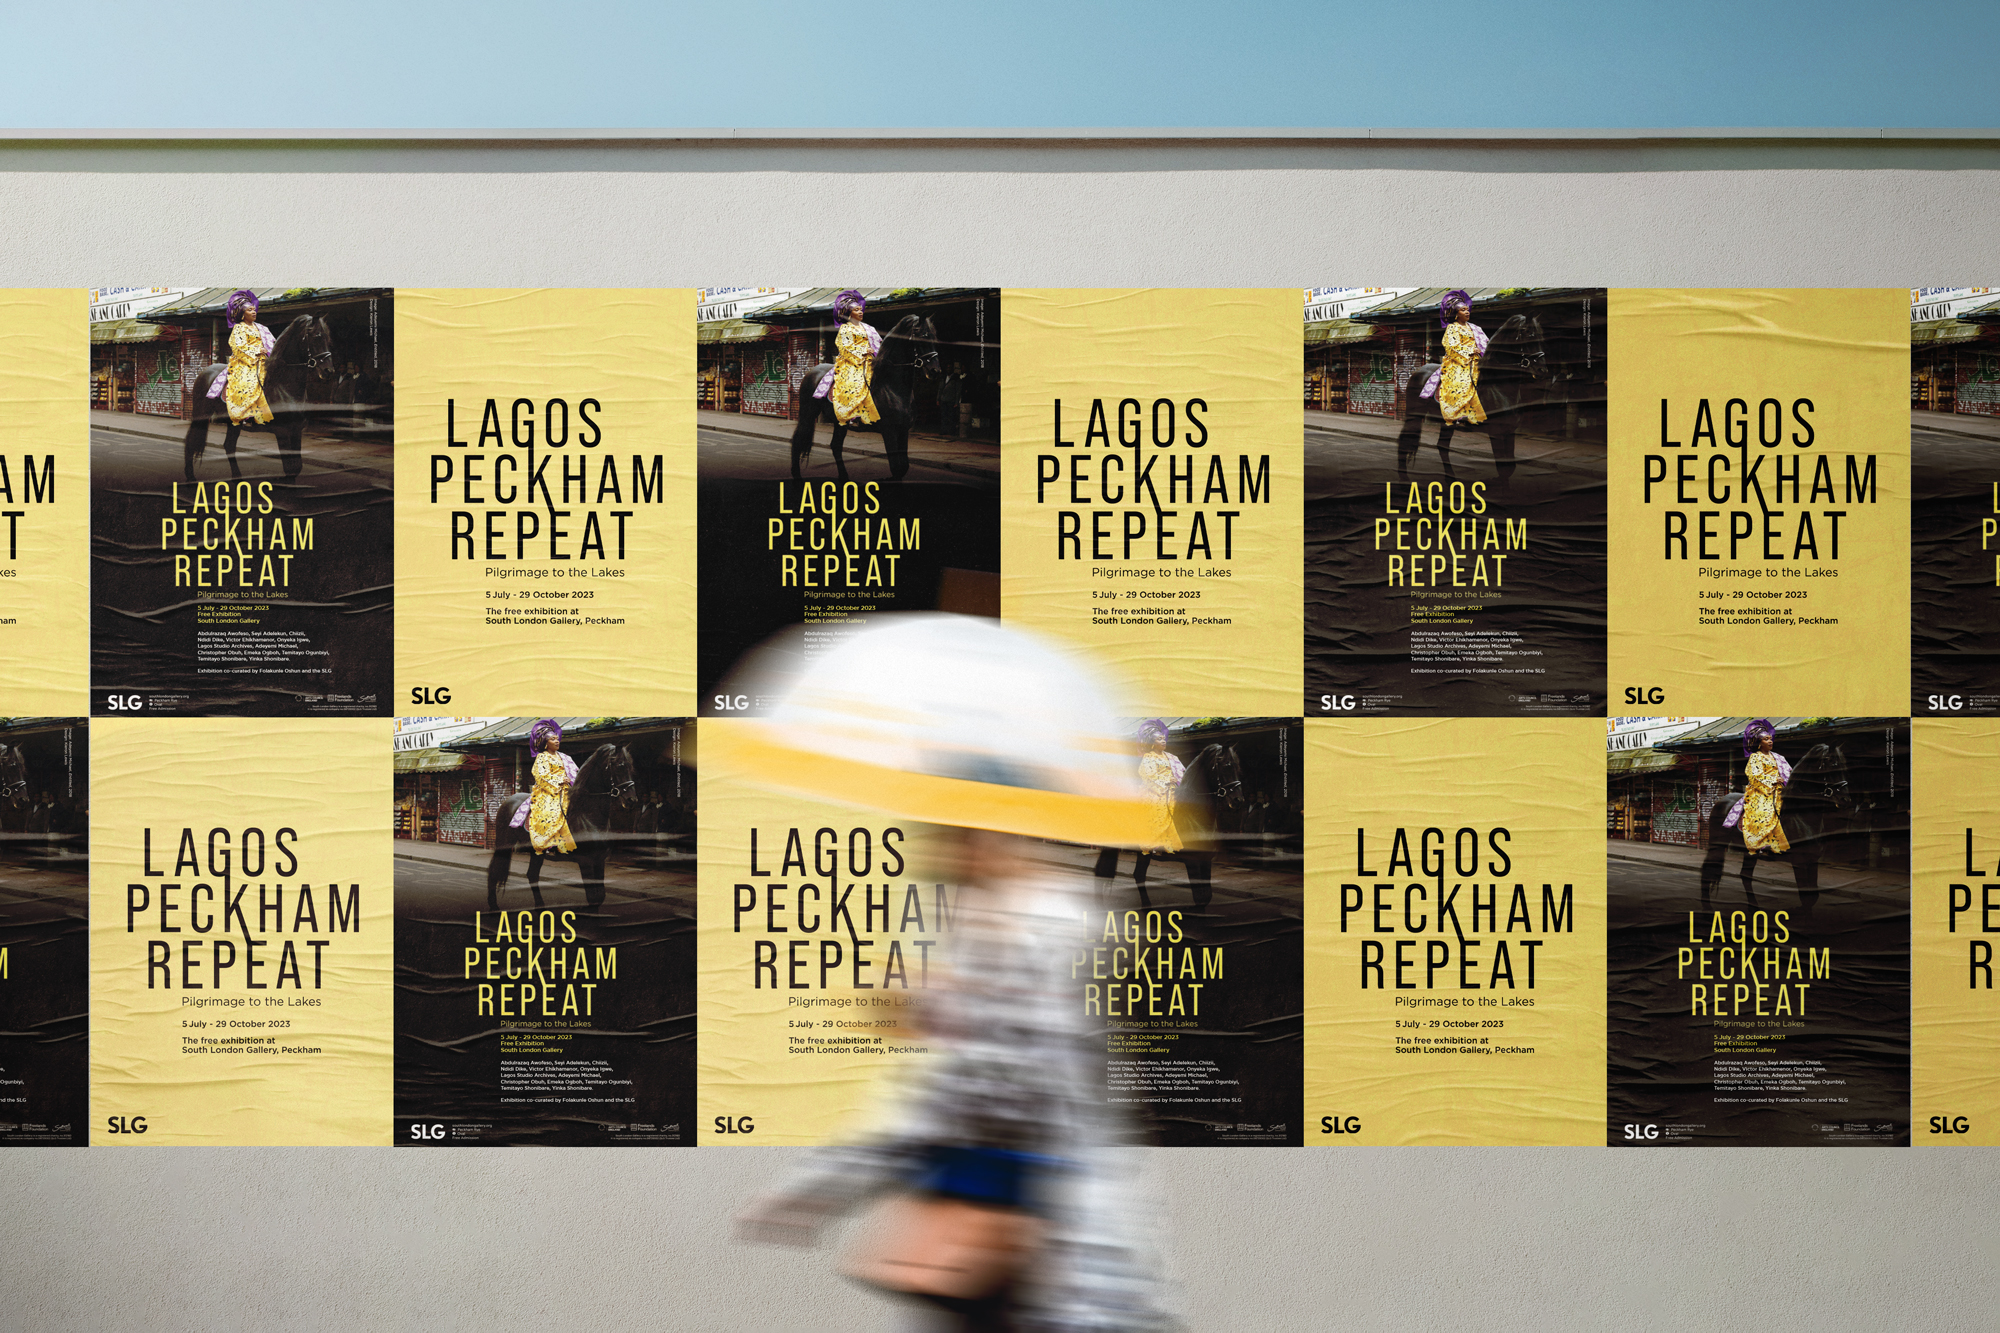 A person holding an umbrella walks past a wall of posters. The posters advertise the exhibition: Lagos, Peckham, Repeat at the South London Gallery.